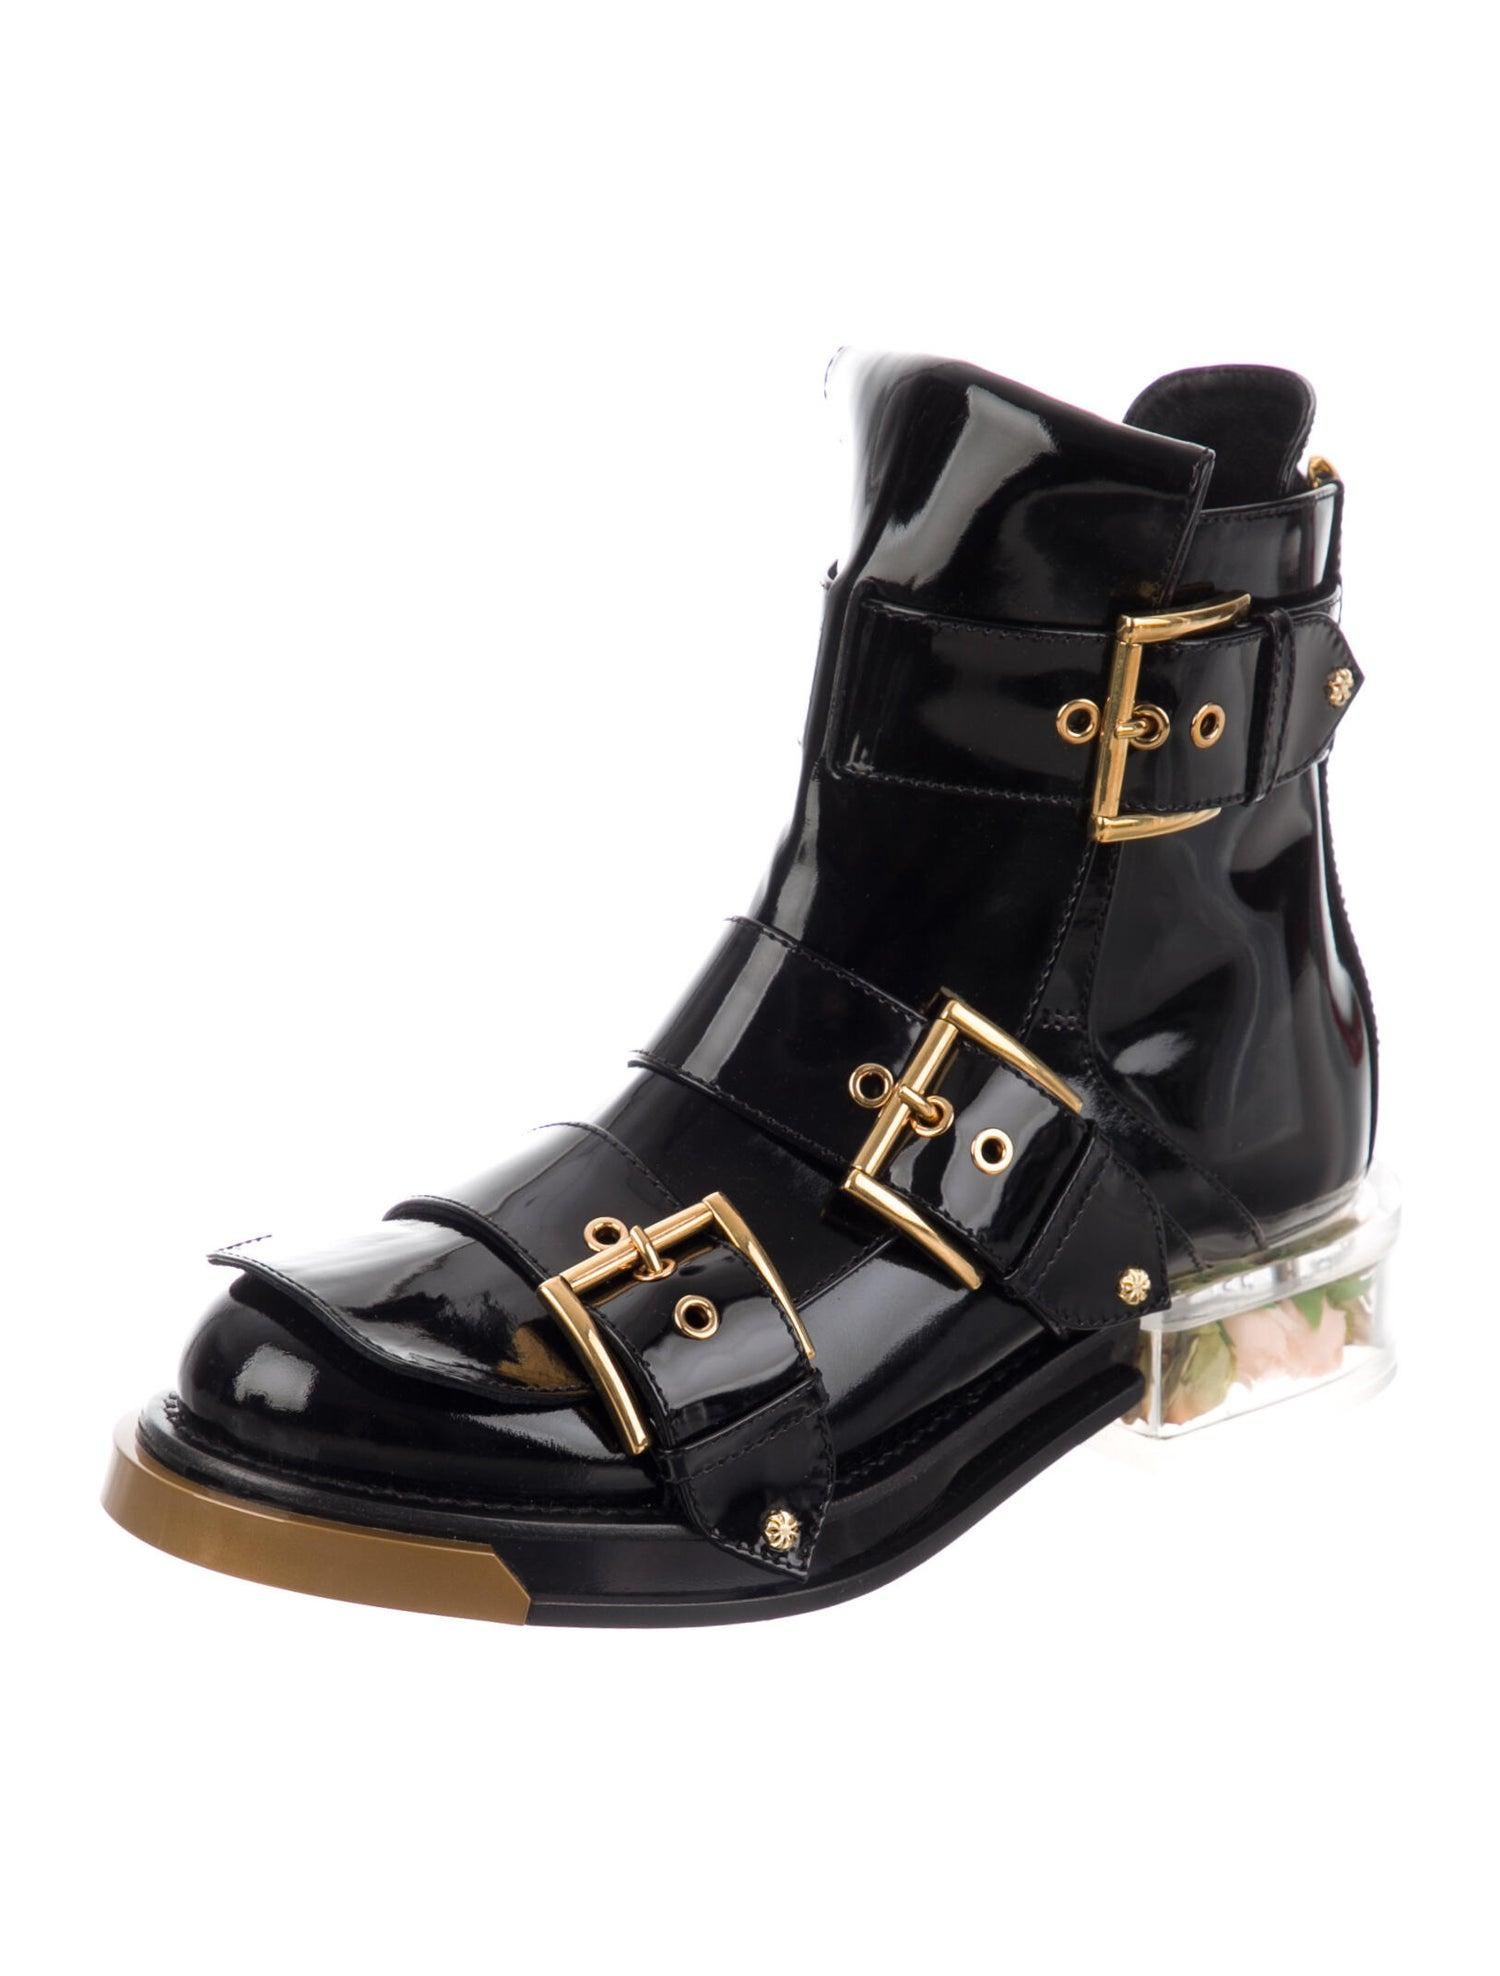 New Alexander McQueen Black Brushed Leather Buckle Ankle Boots
S/S 2018 Runway Collection
Designer size - 36 ( US 6 )
100% Calfskin. Color - Black. Three gold-tone buckles, an exaggerated tongue, leather sole, bronze wrap around the toe. 
Soft pink